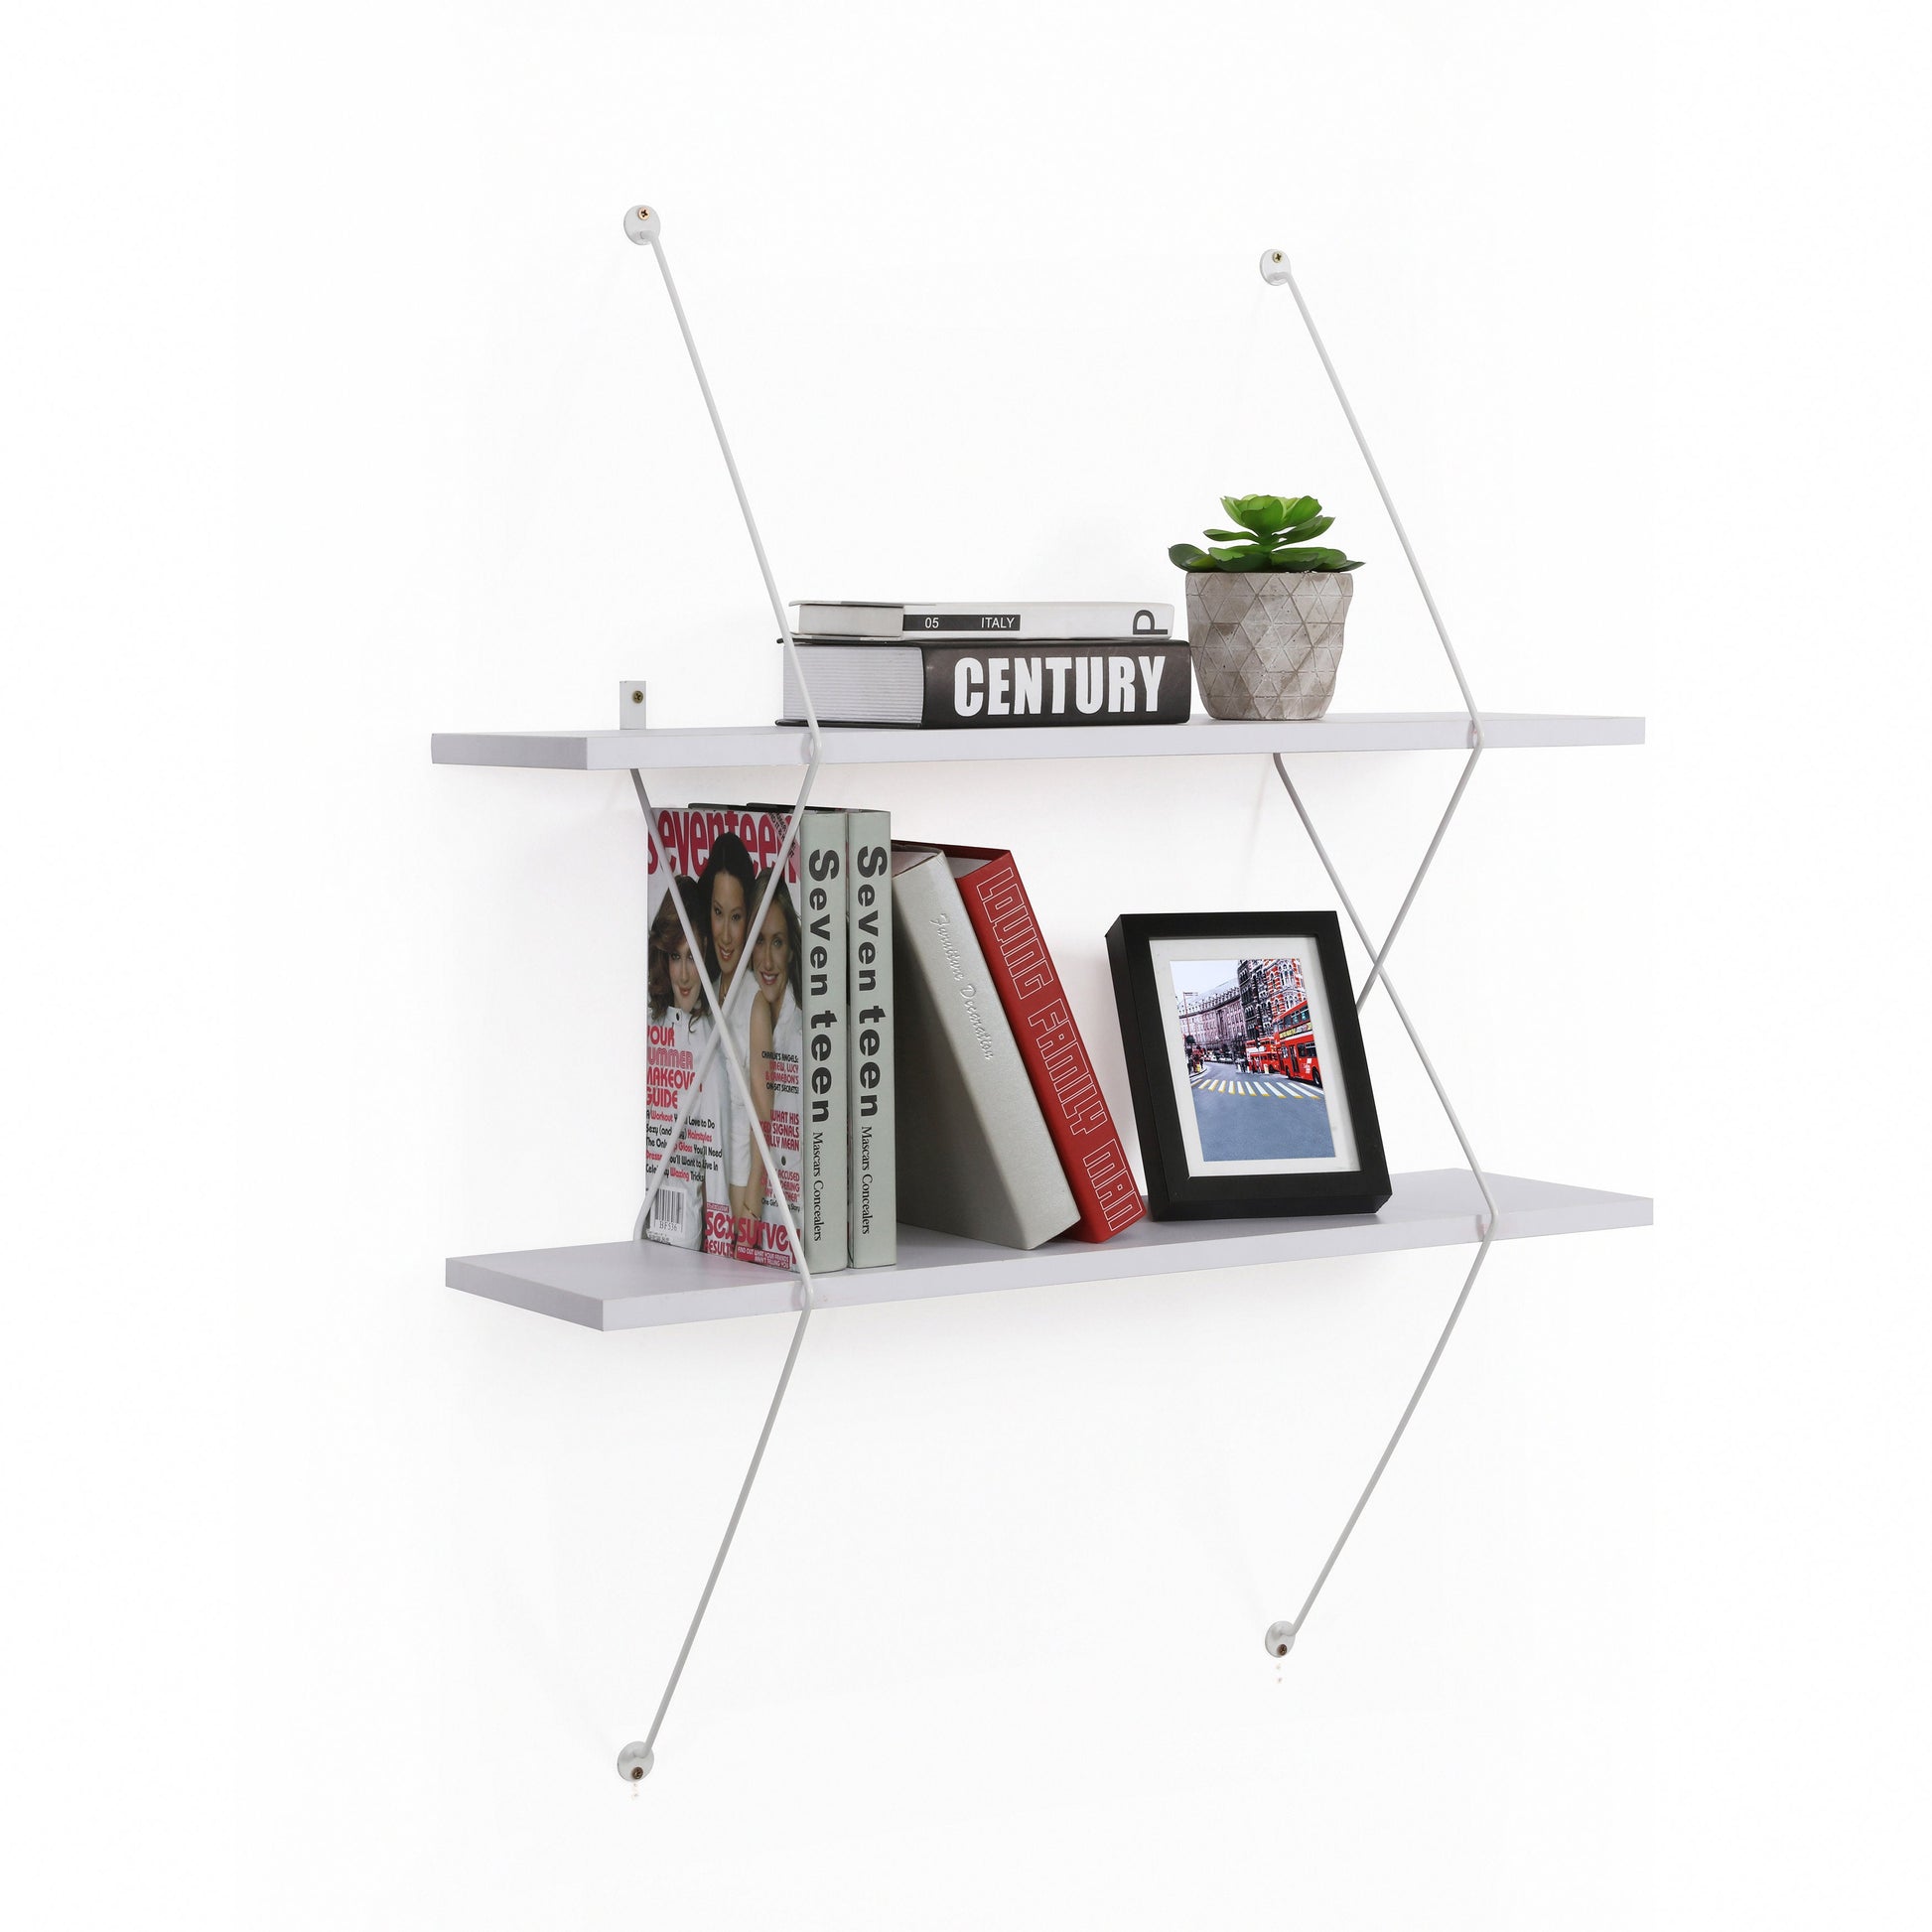 Contemporary shelving with books and plants on